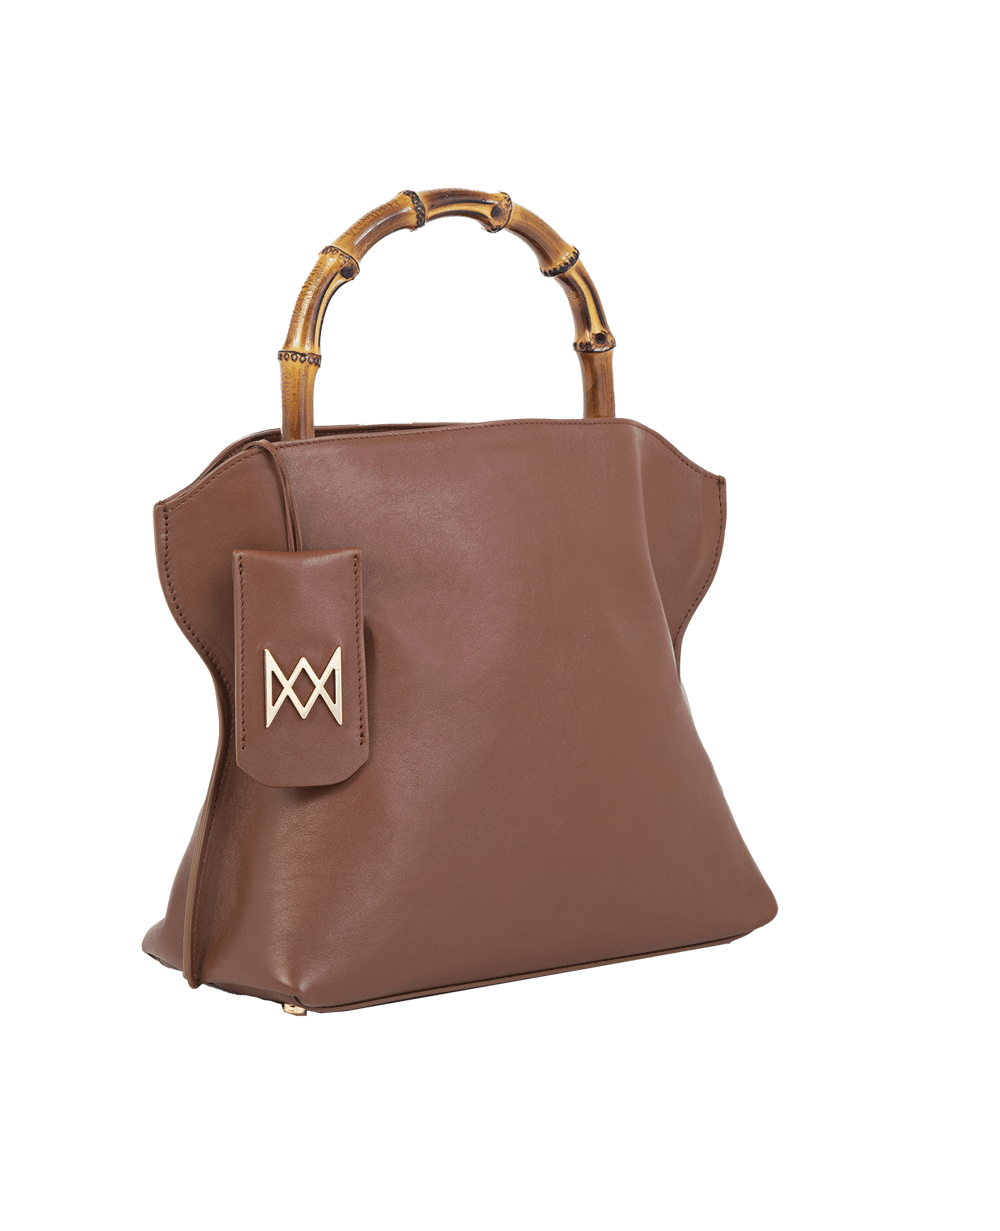 Cross-body bag in calf leather with detachable shoulder strap. Bamboo handles. Made In Italy. Two compartments, zip pocket in the back compartment. Magnetic flap closure with logo. Color: Mocha. Size: Large